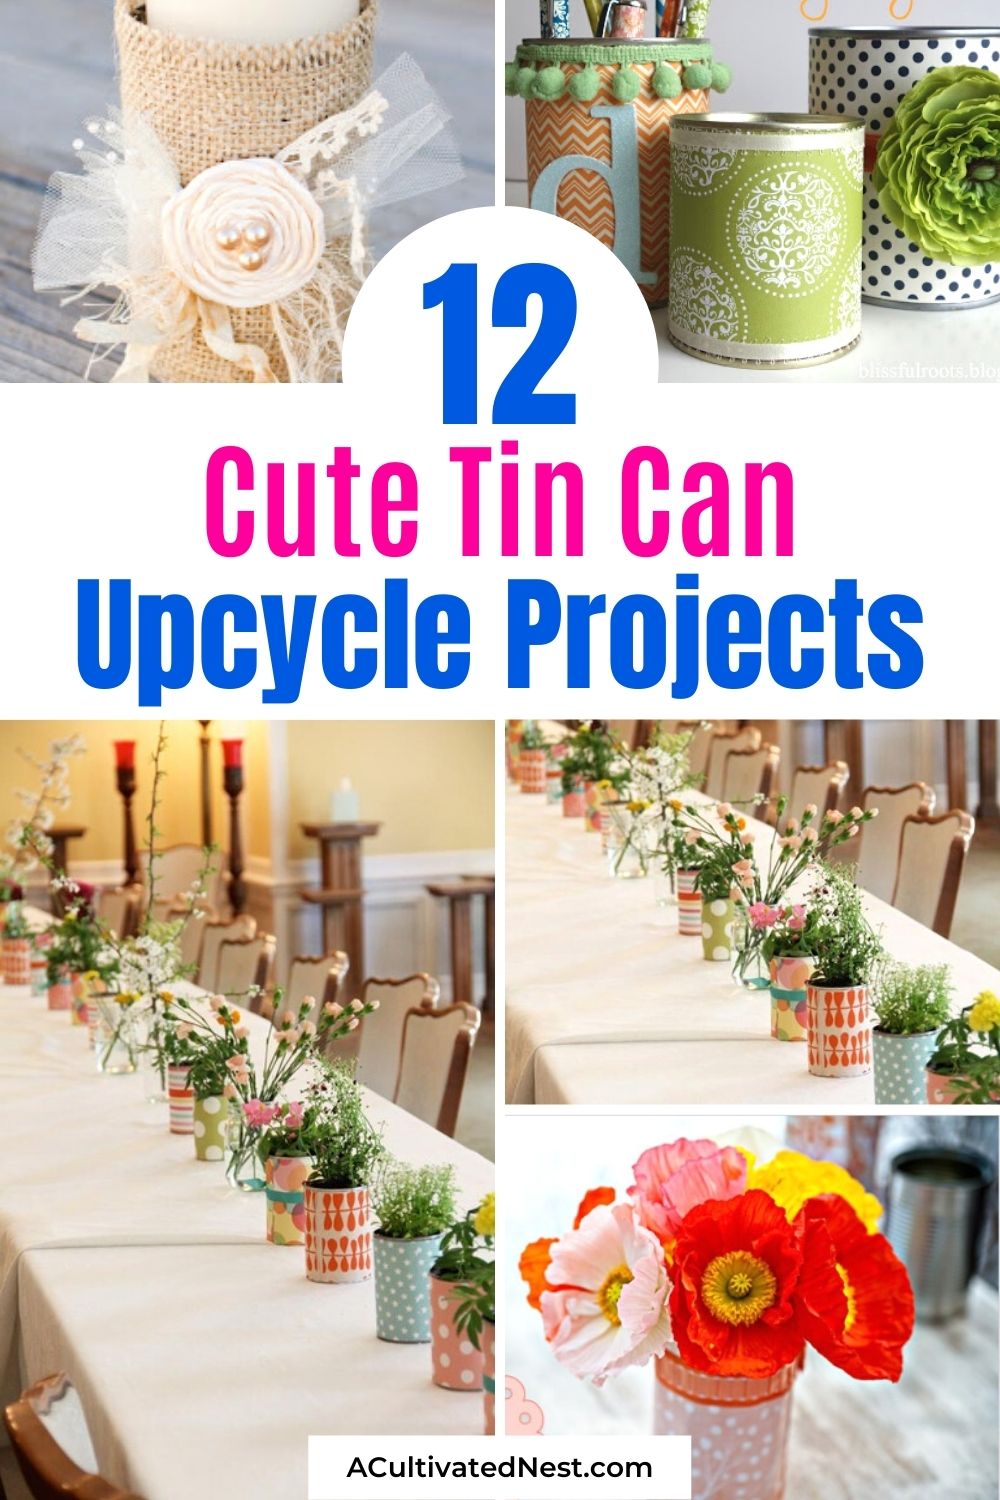 12 Pretty Ways to Use an Ordinary Tin Can- If you want to make some new home décor on a budget, try these tin can upcycles! There are so many pretty ways to use an ordinary tin can! | #upcycling #crafting #recycle #diyProject #ACultivatedNest